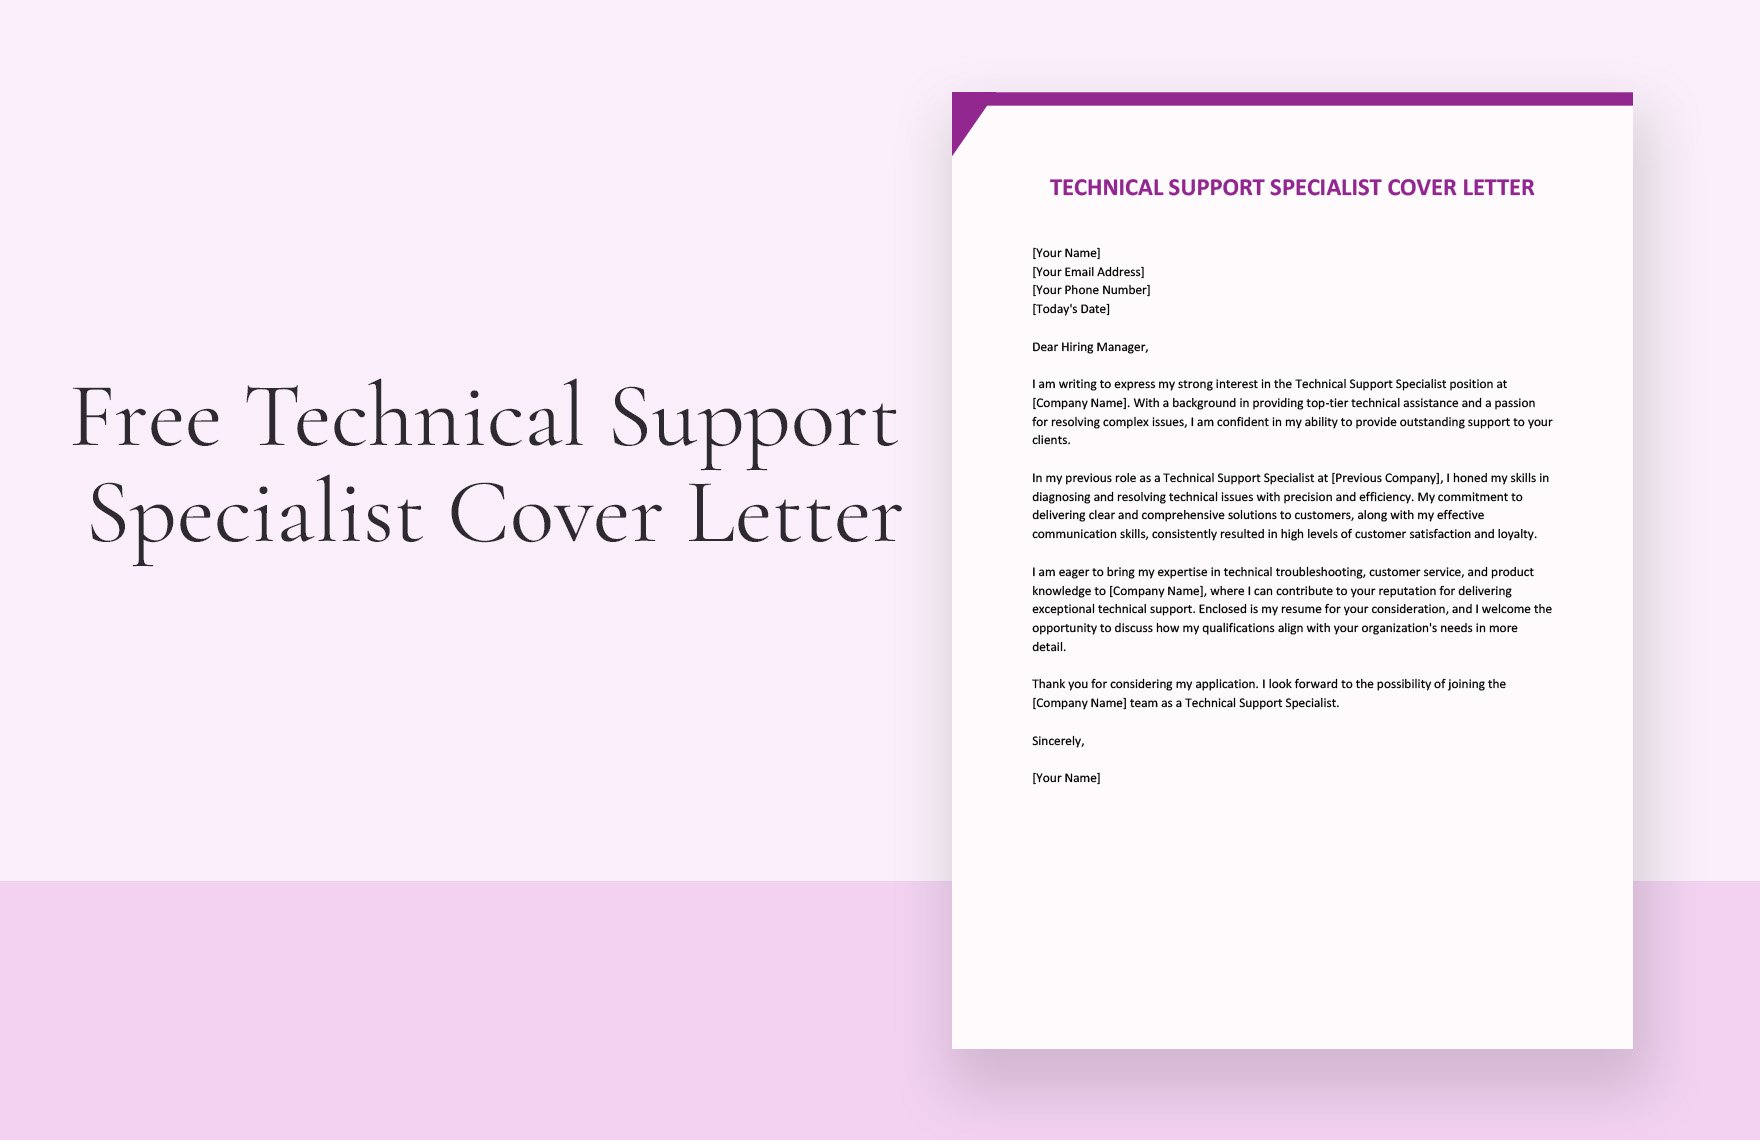 Technical Support Specialist Cover Letter